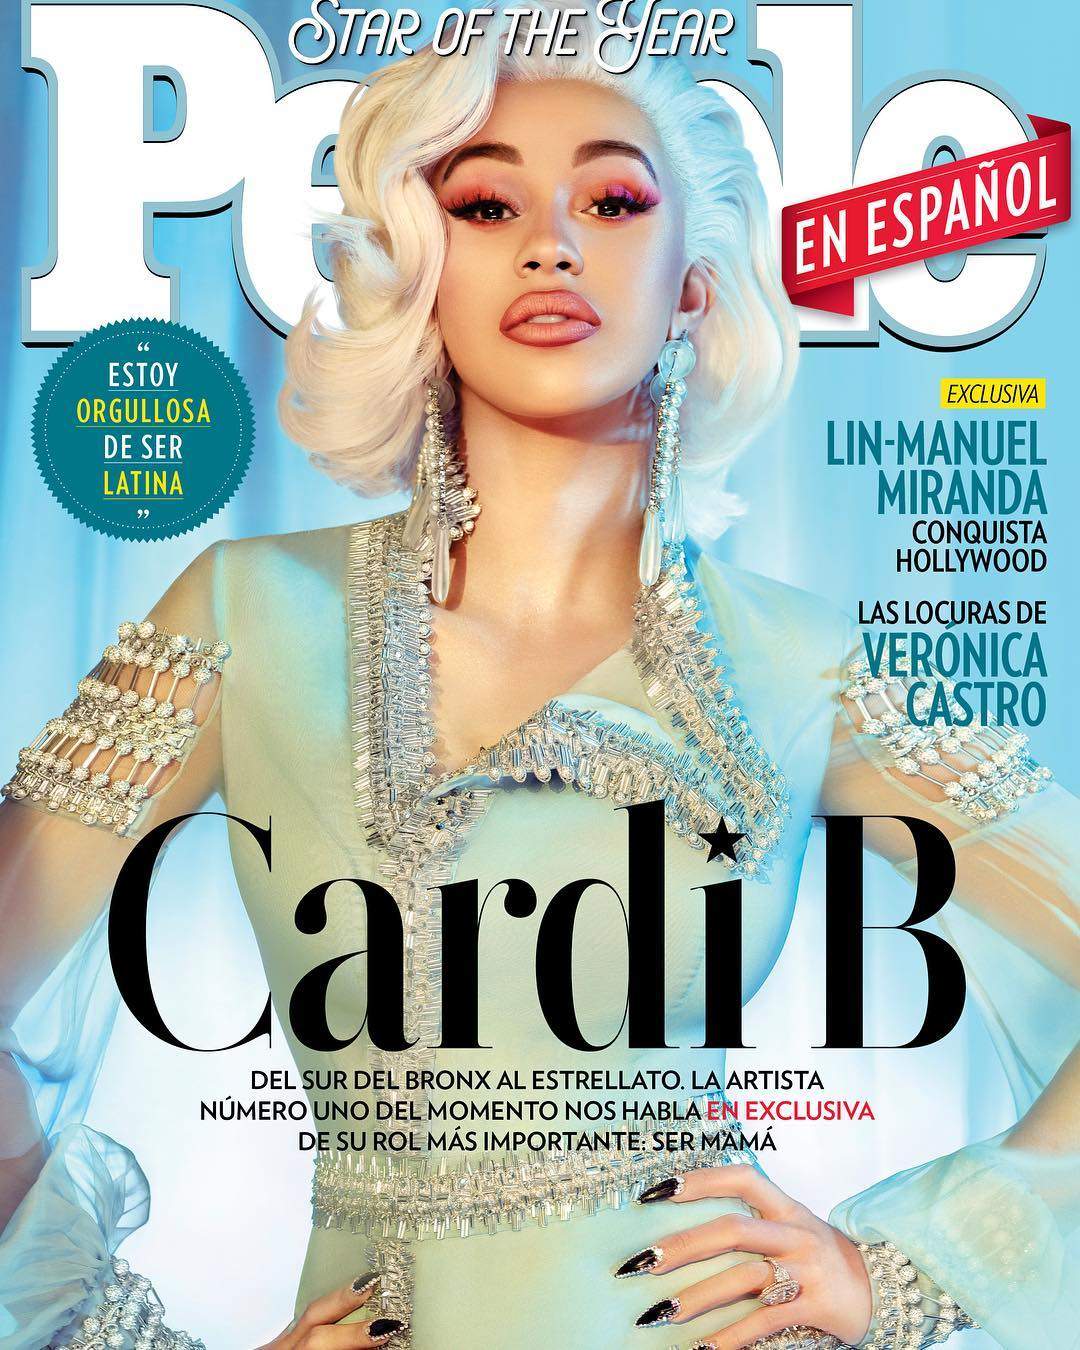 Cardi B Is The 'Star Of The Year' As She Covers People En Español Magazine